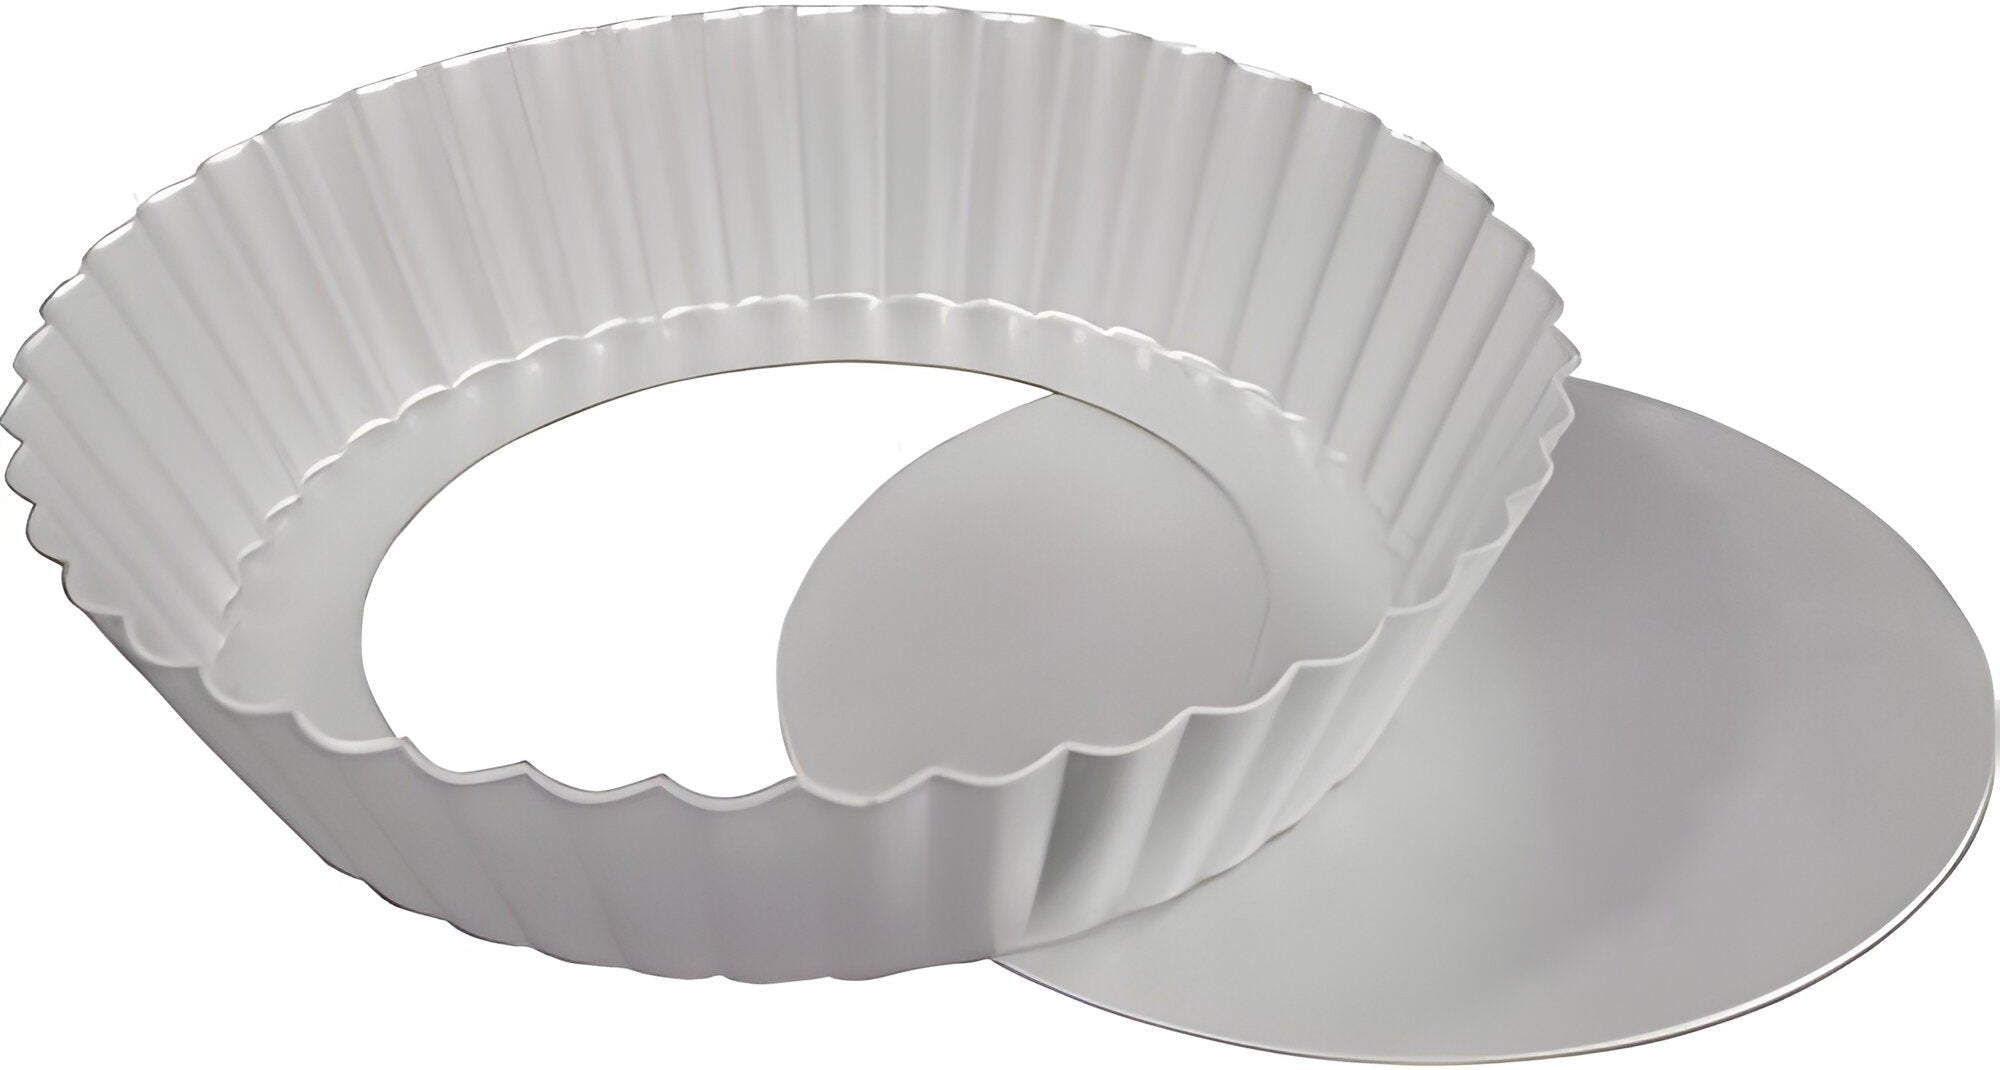 Fat Daddio's - 6.5" X 1" Anodized Aluminum Removable Bottom Fluted Tart Pan - PFT-65